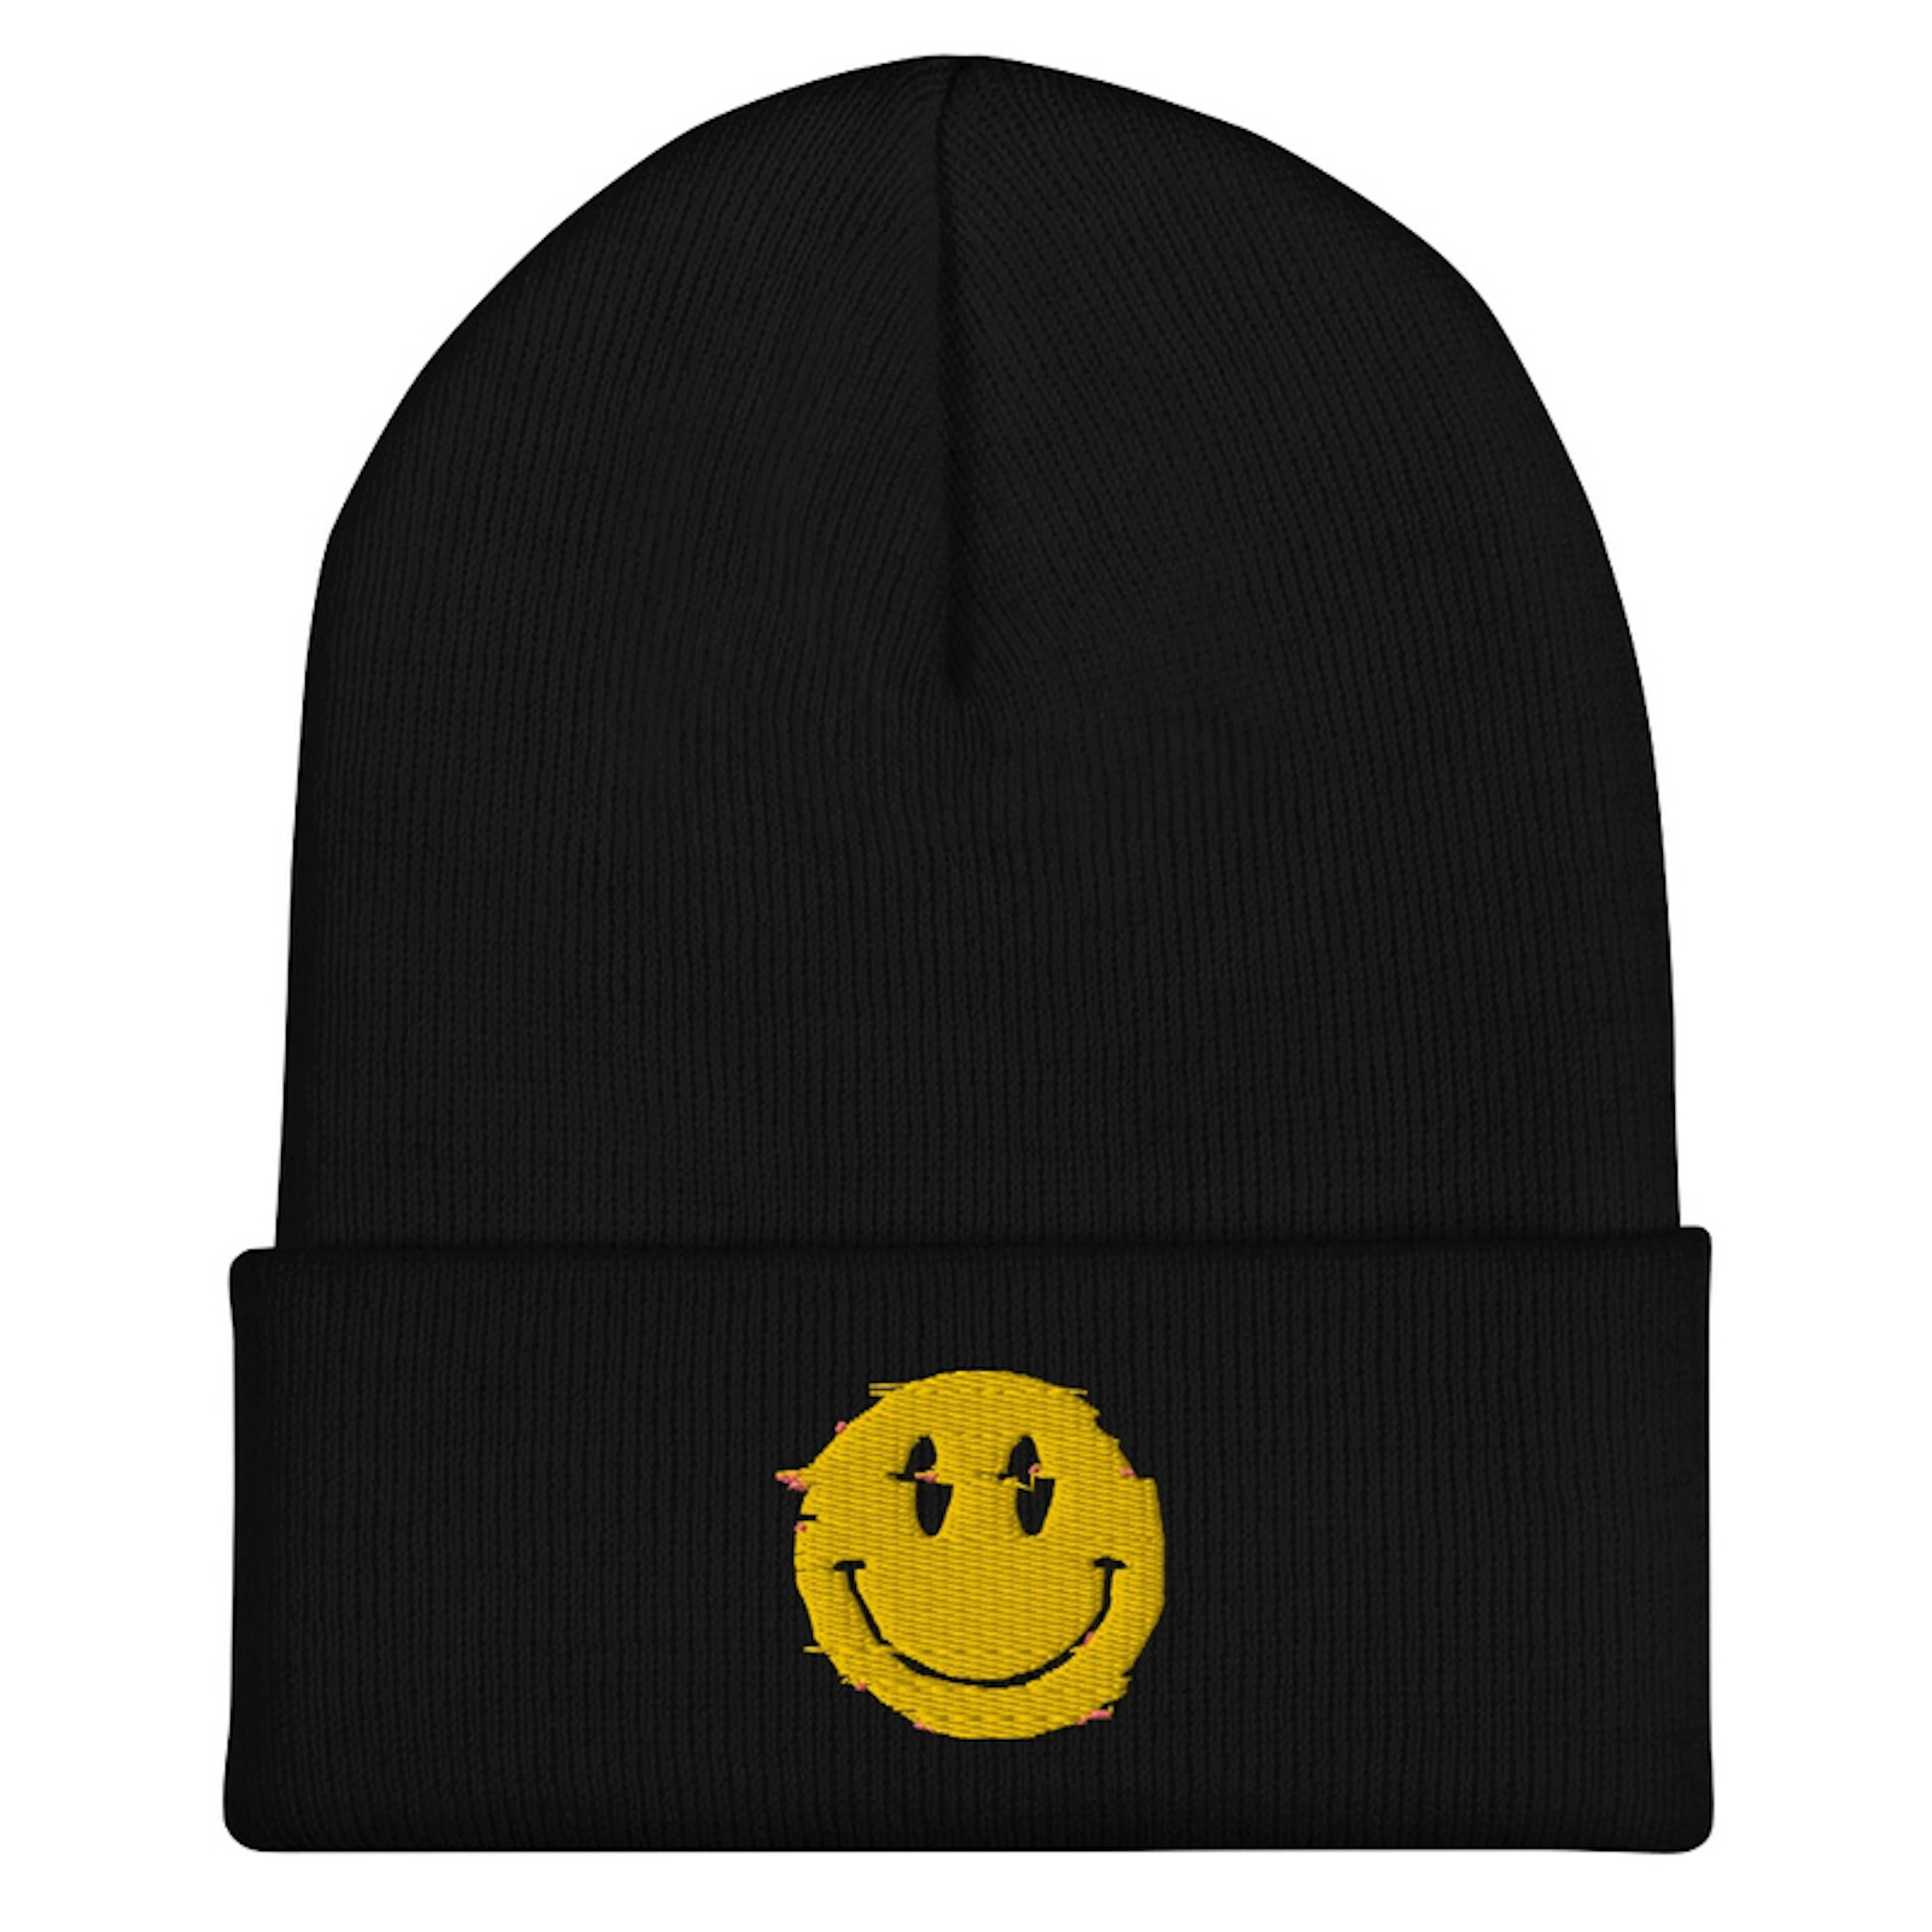 MESSED UP SMILEYFACE BEANIE HAT